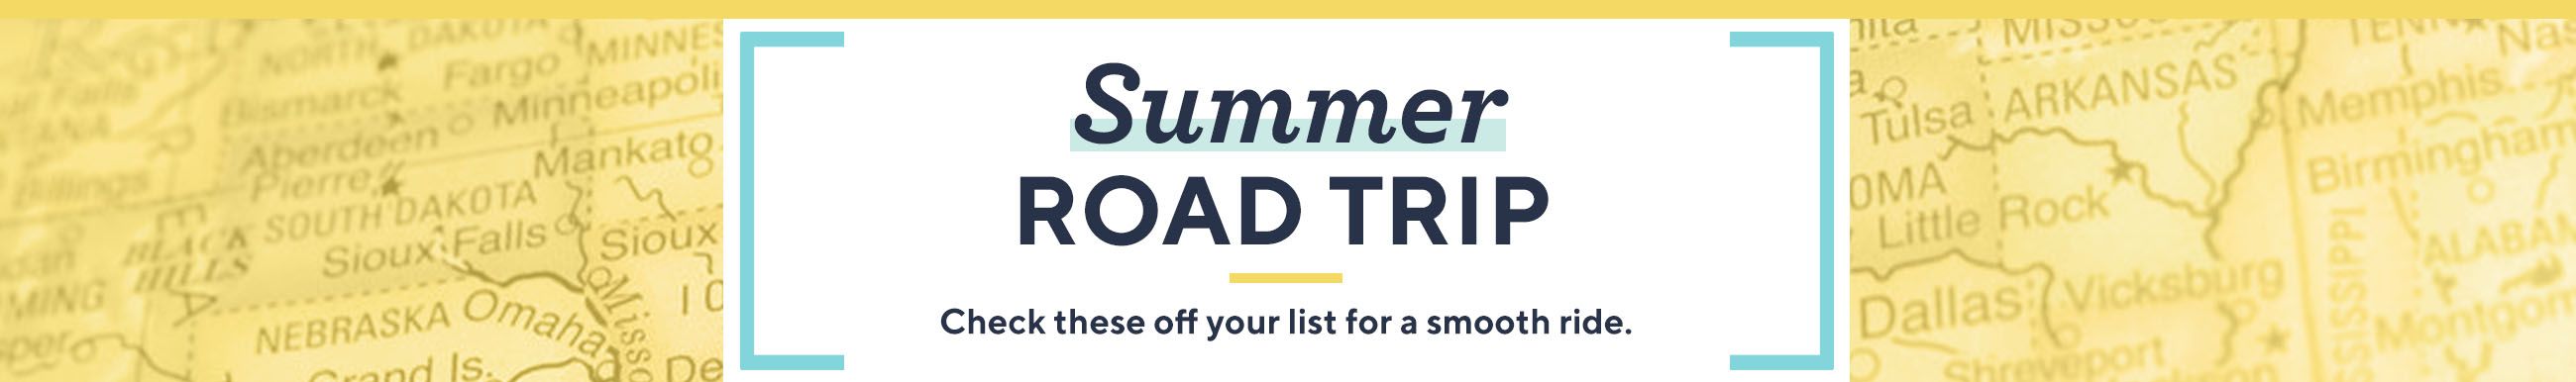 Summer Road Trip. Check these off your list for a smooth ride.